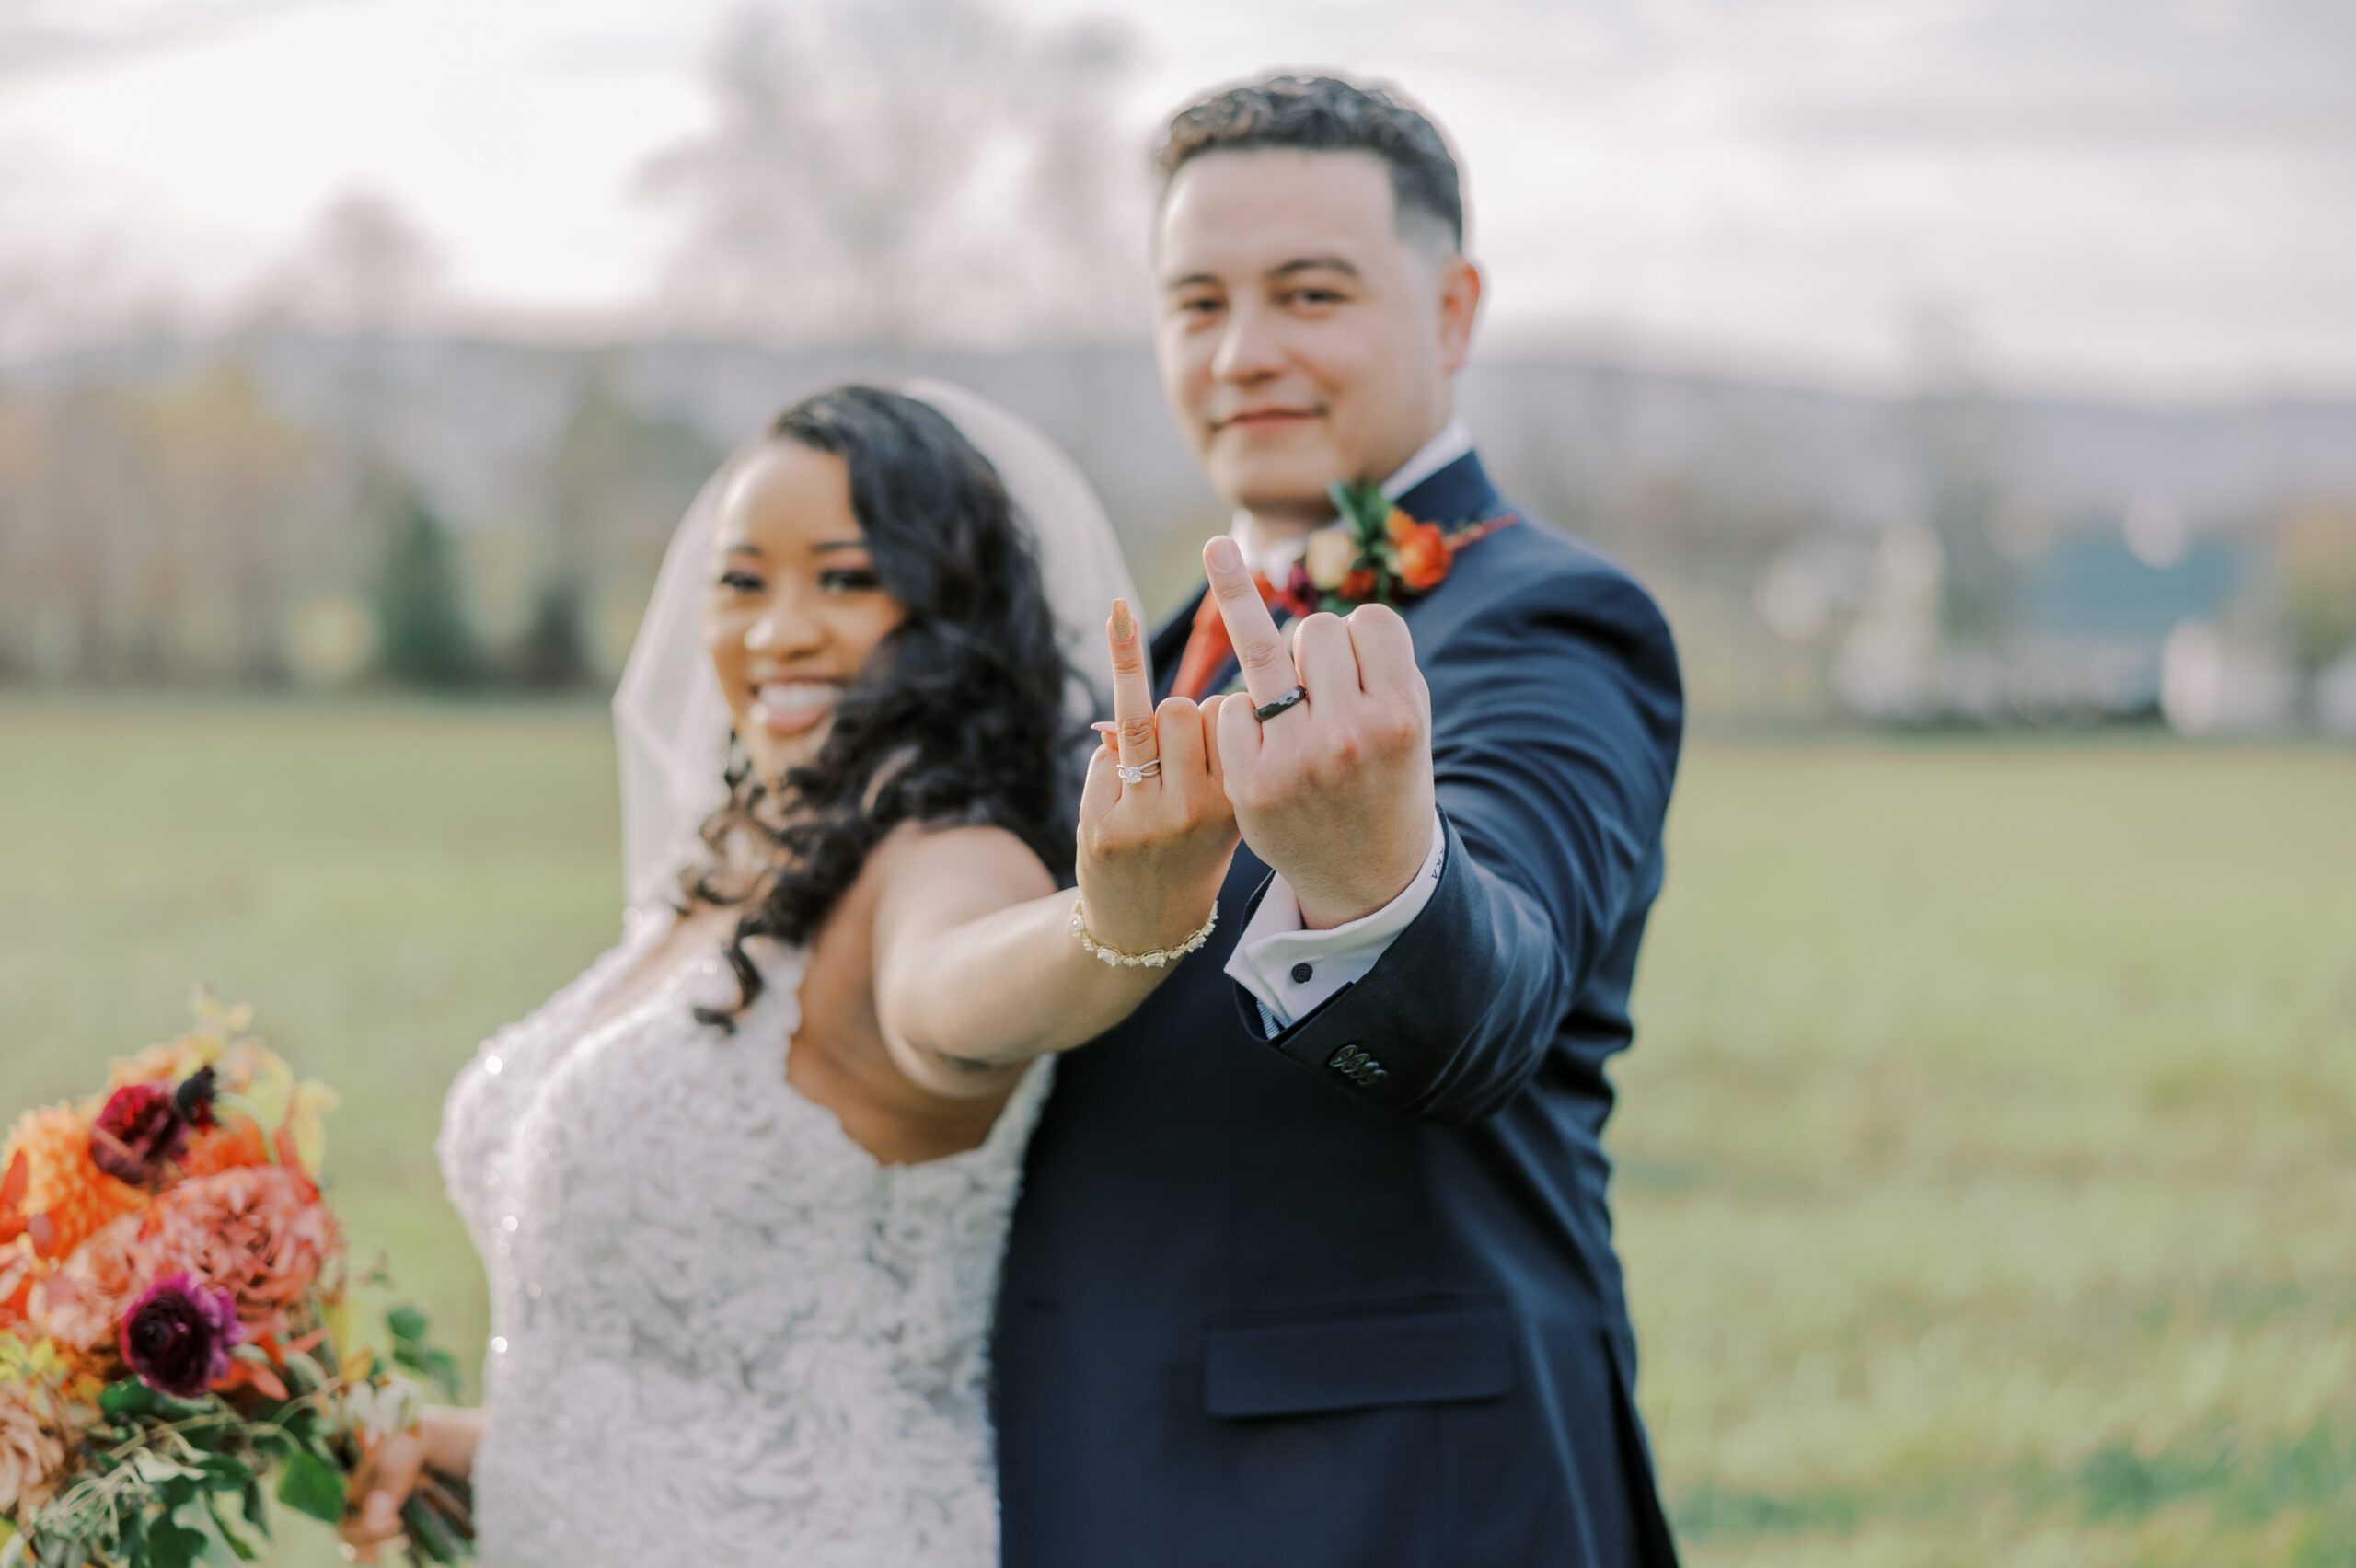 Photo of bride and groom holding up their ring fingers showing off their rings, couple is slightly out of focus, hands in focus